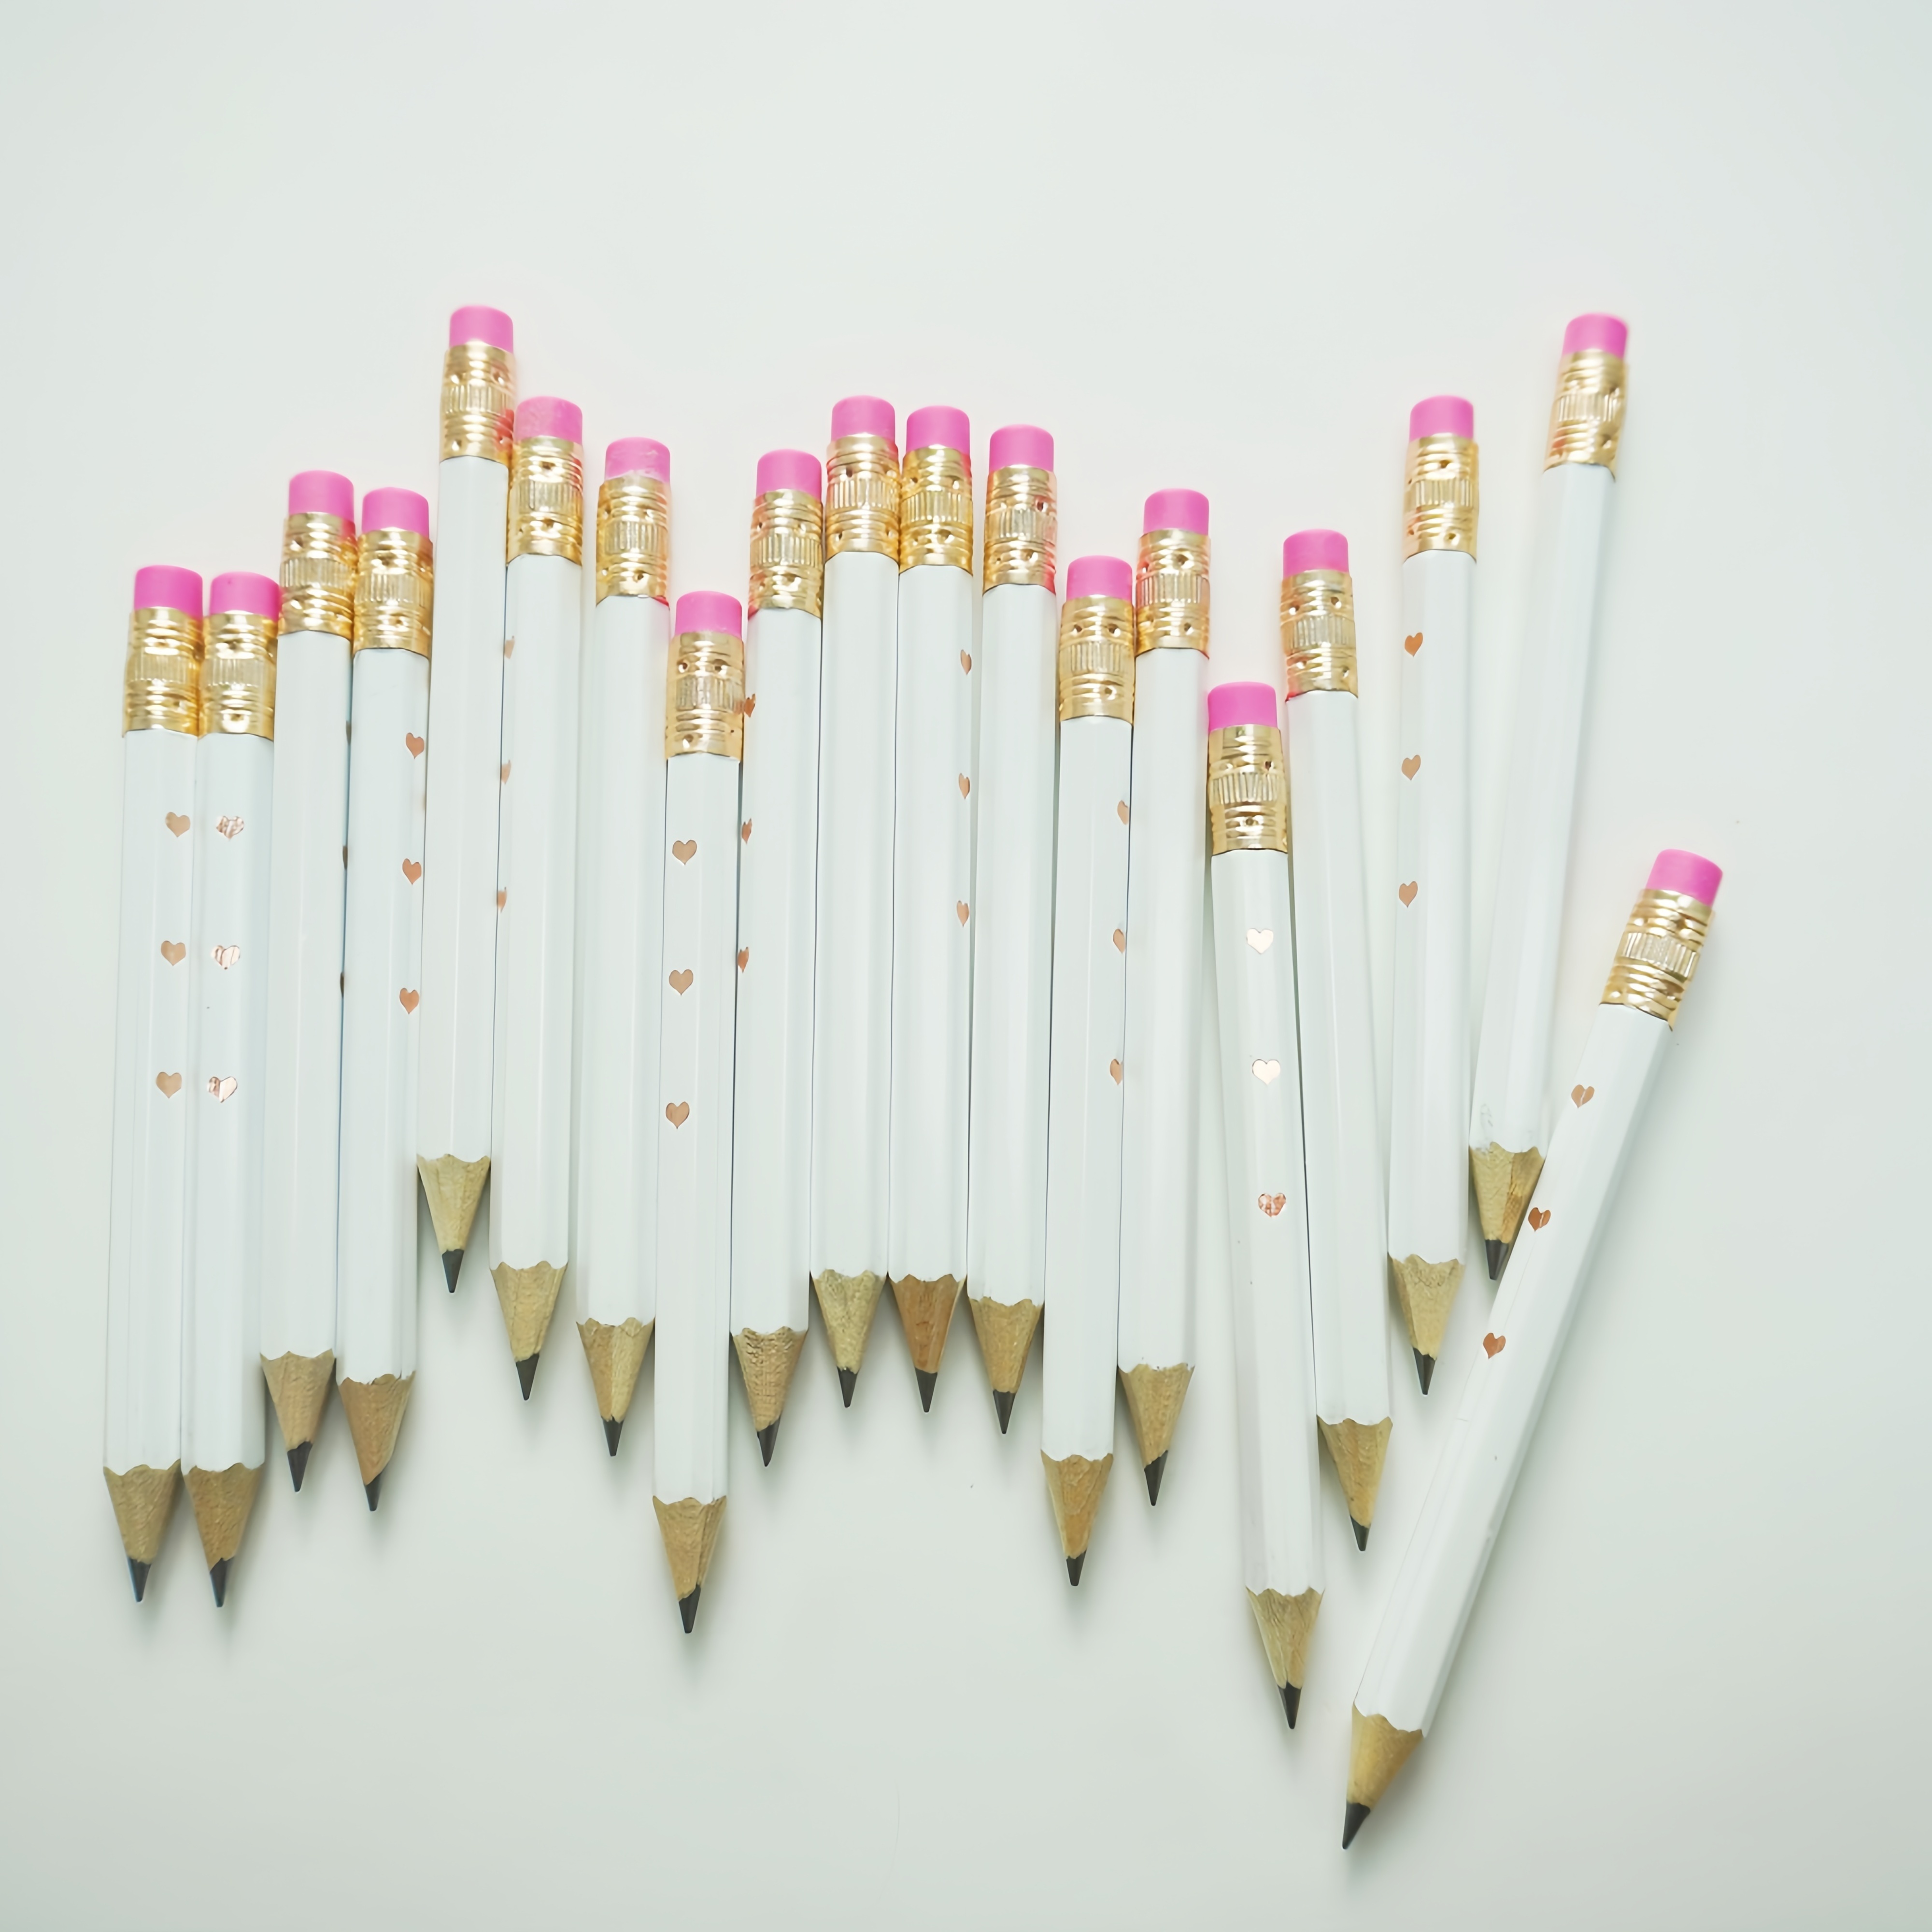 

Piece Of 10 Or 20 Elegant Rose Golden Mini Pencils - Perfect For Party Favors, Bridal Showers & Games, 2mm Lead, For Ages 14+